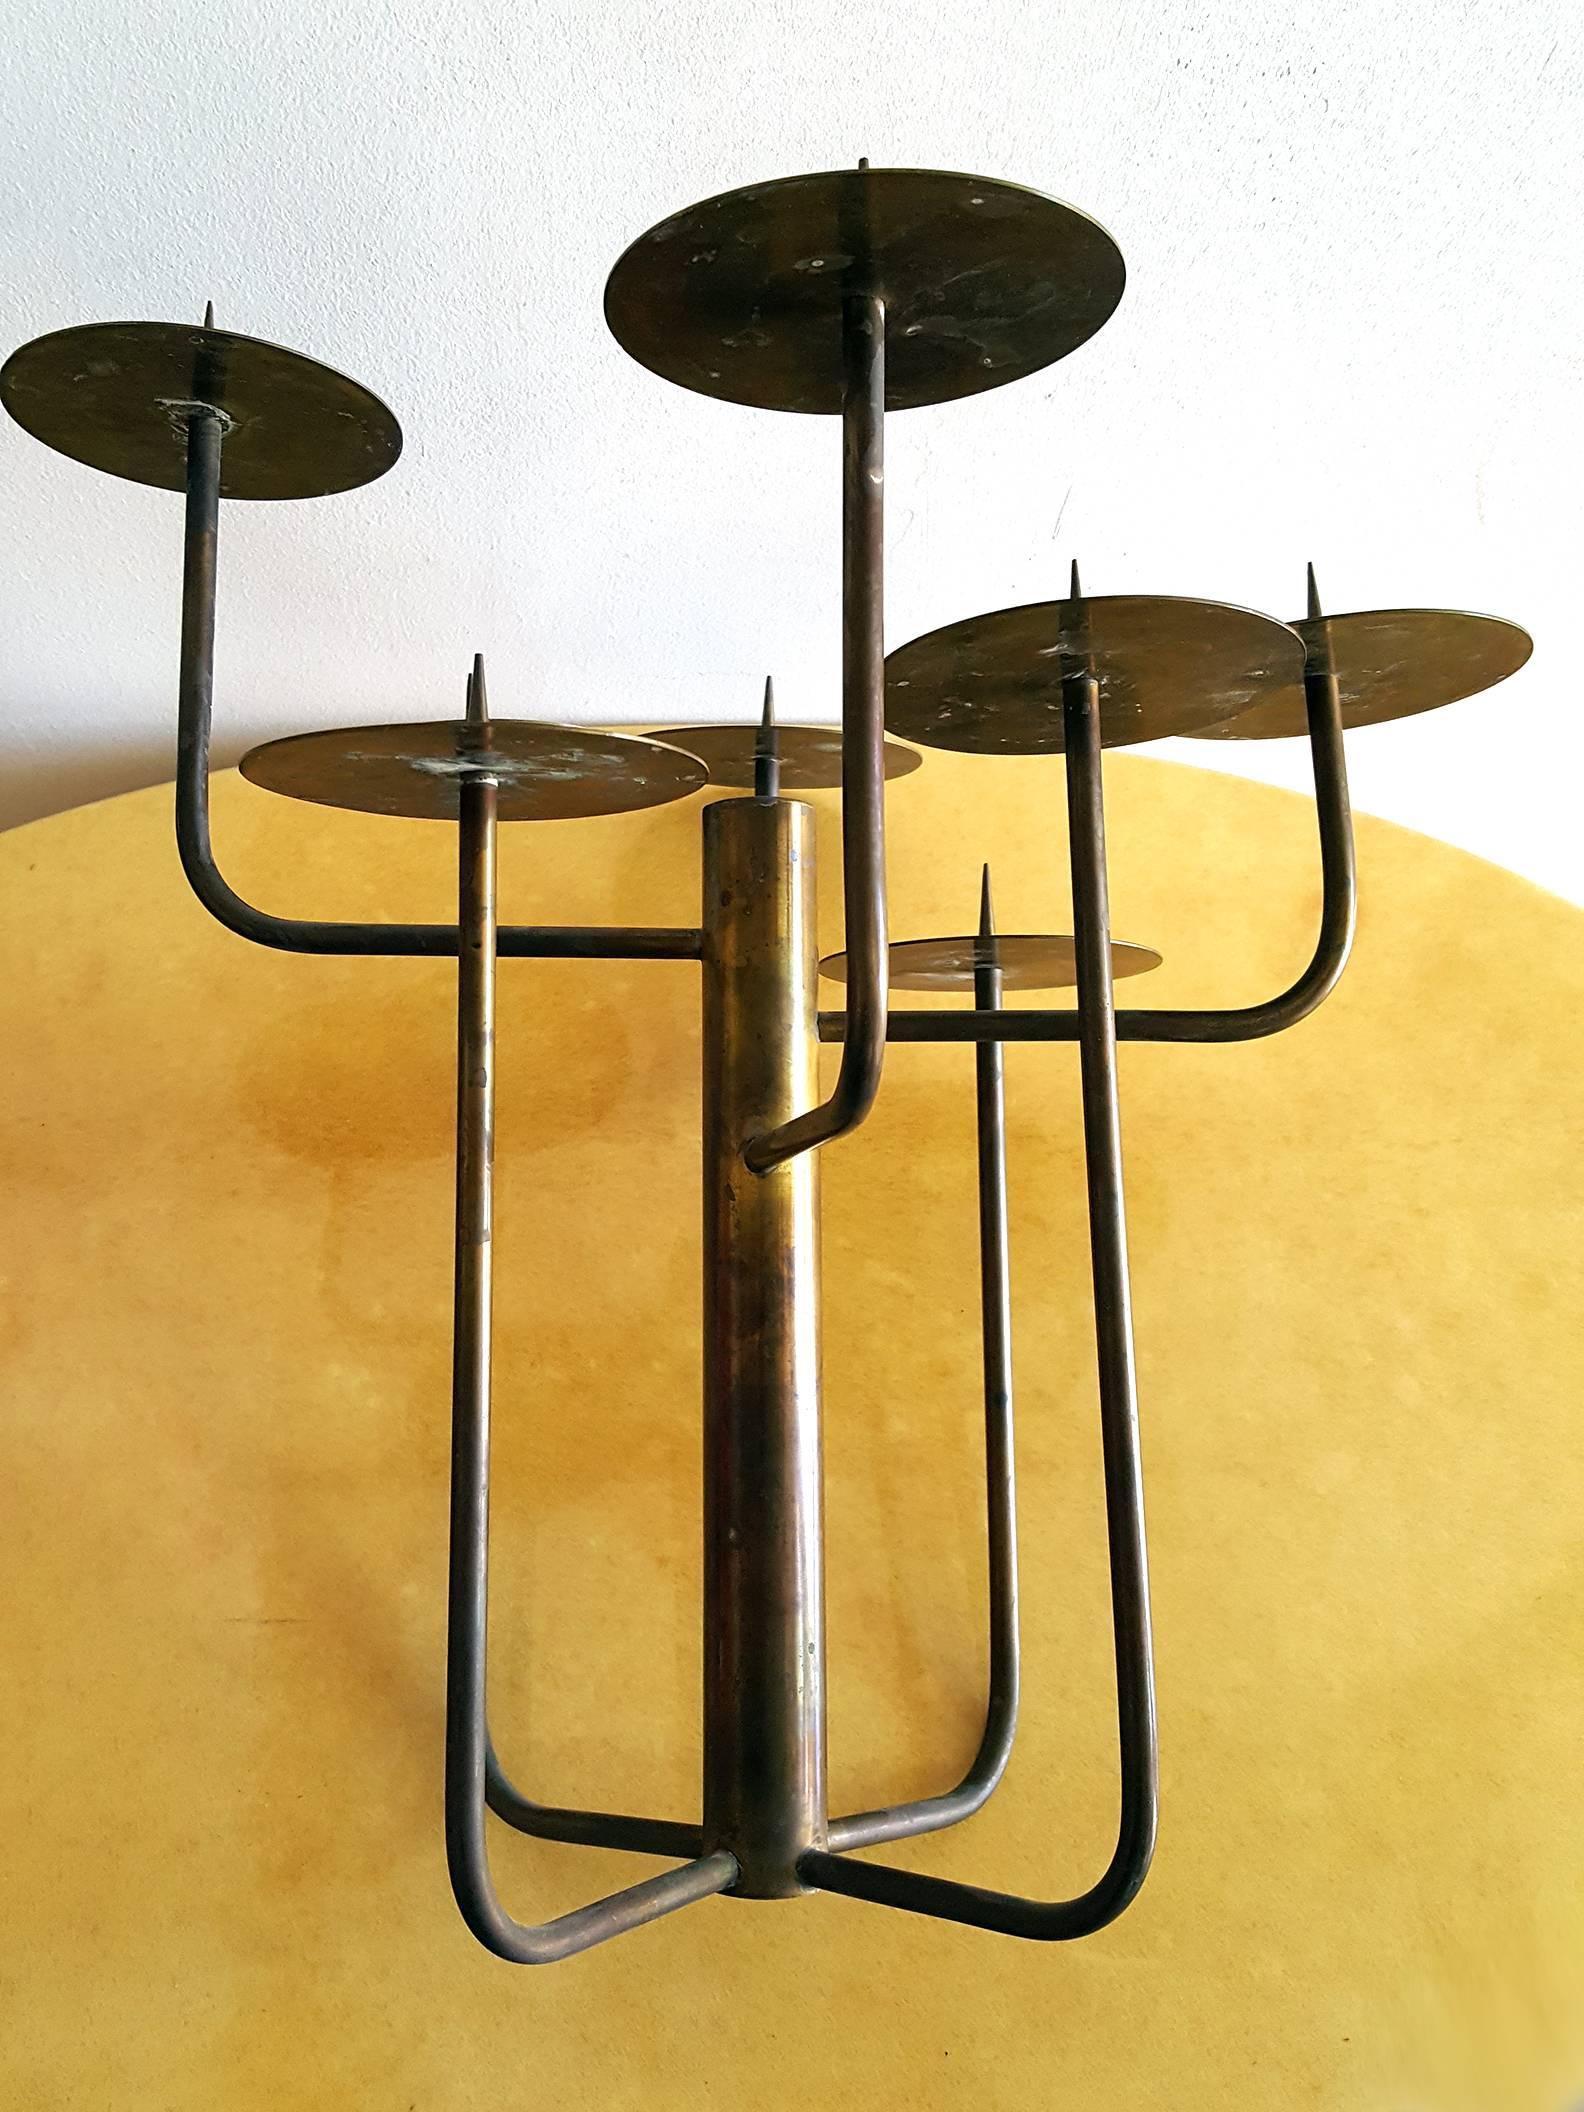 1950s brass studio candelabra comprised of eight brass arms emanating from the circumference of a larger central column. Each rod terminates with a removable drip plate adorned with a solid brass spike. Beautiful patina.

Each drip plate measures